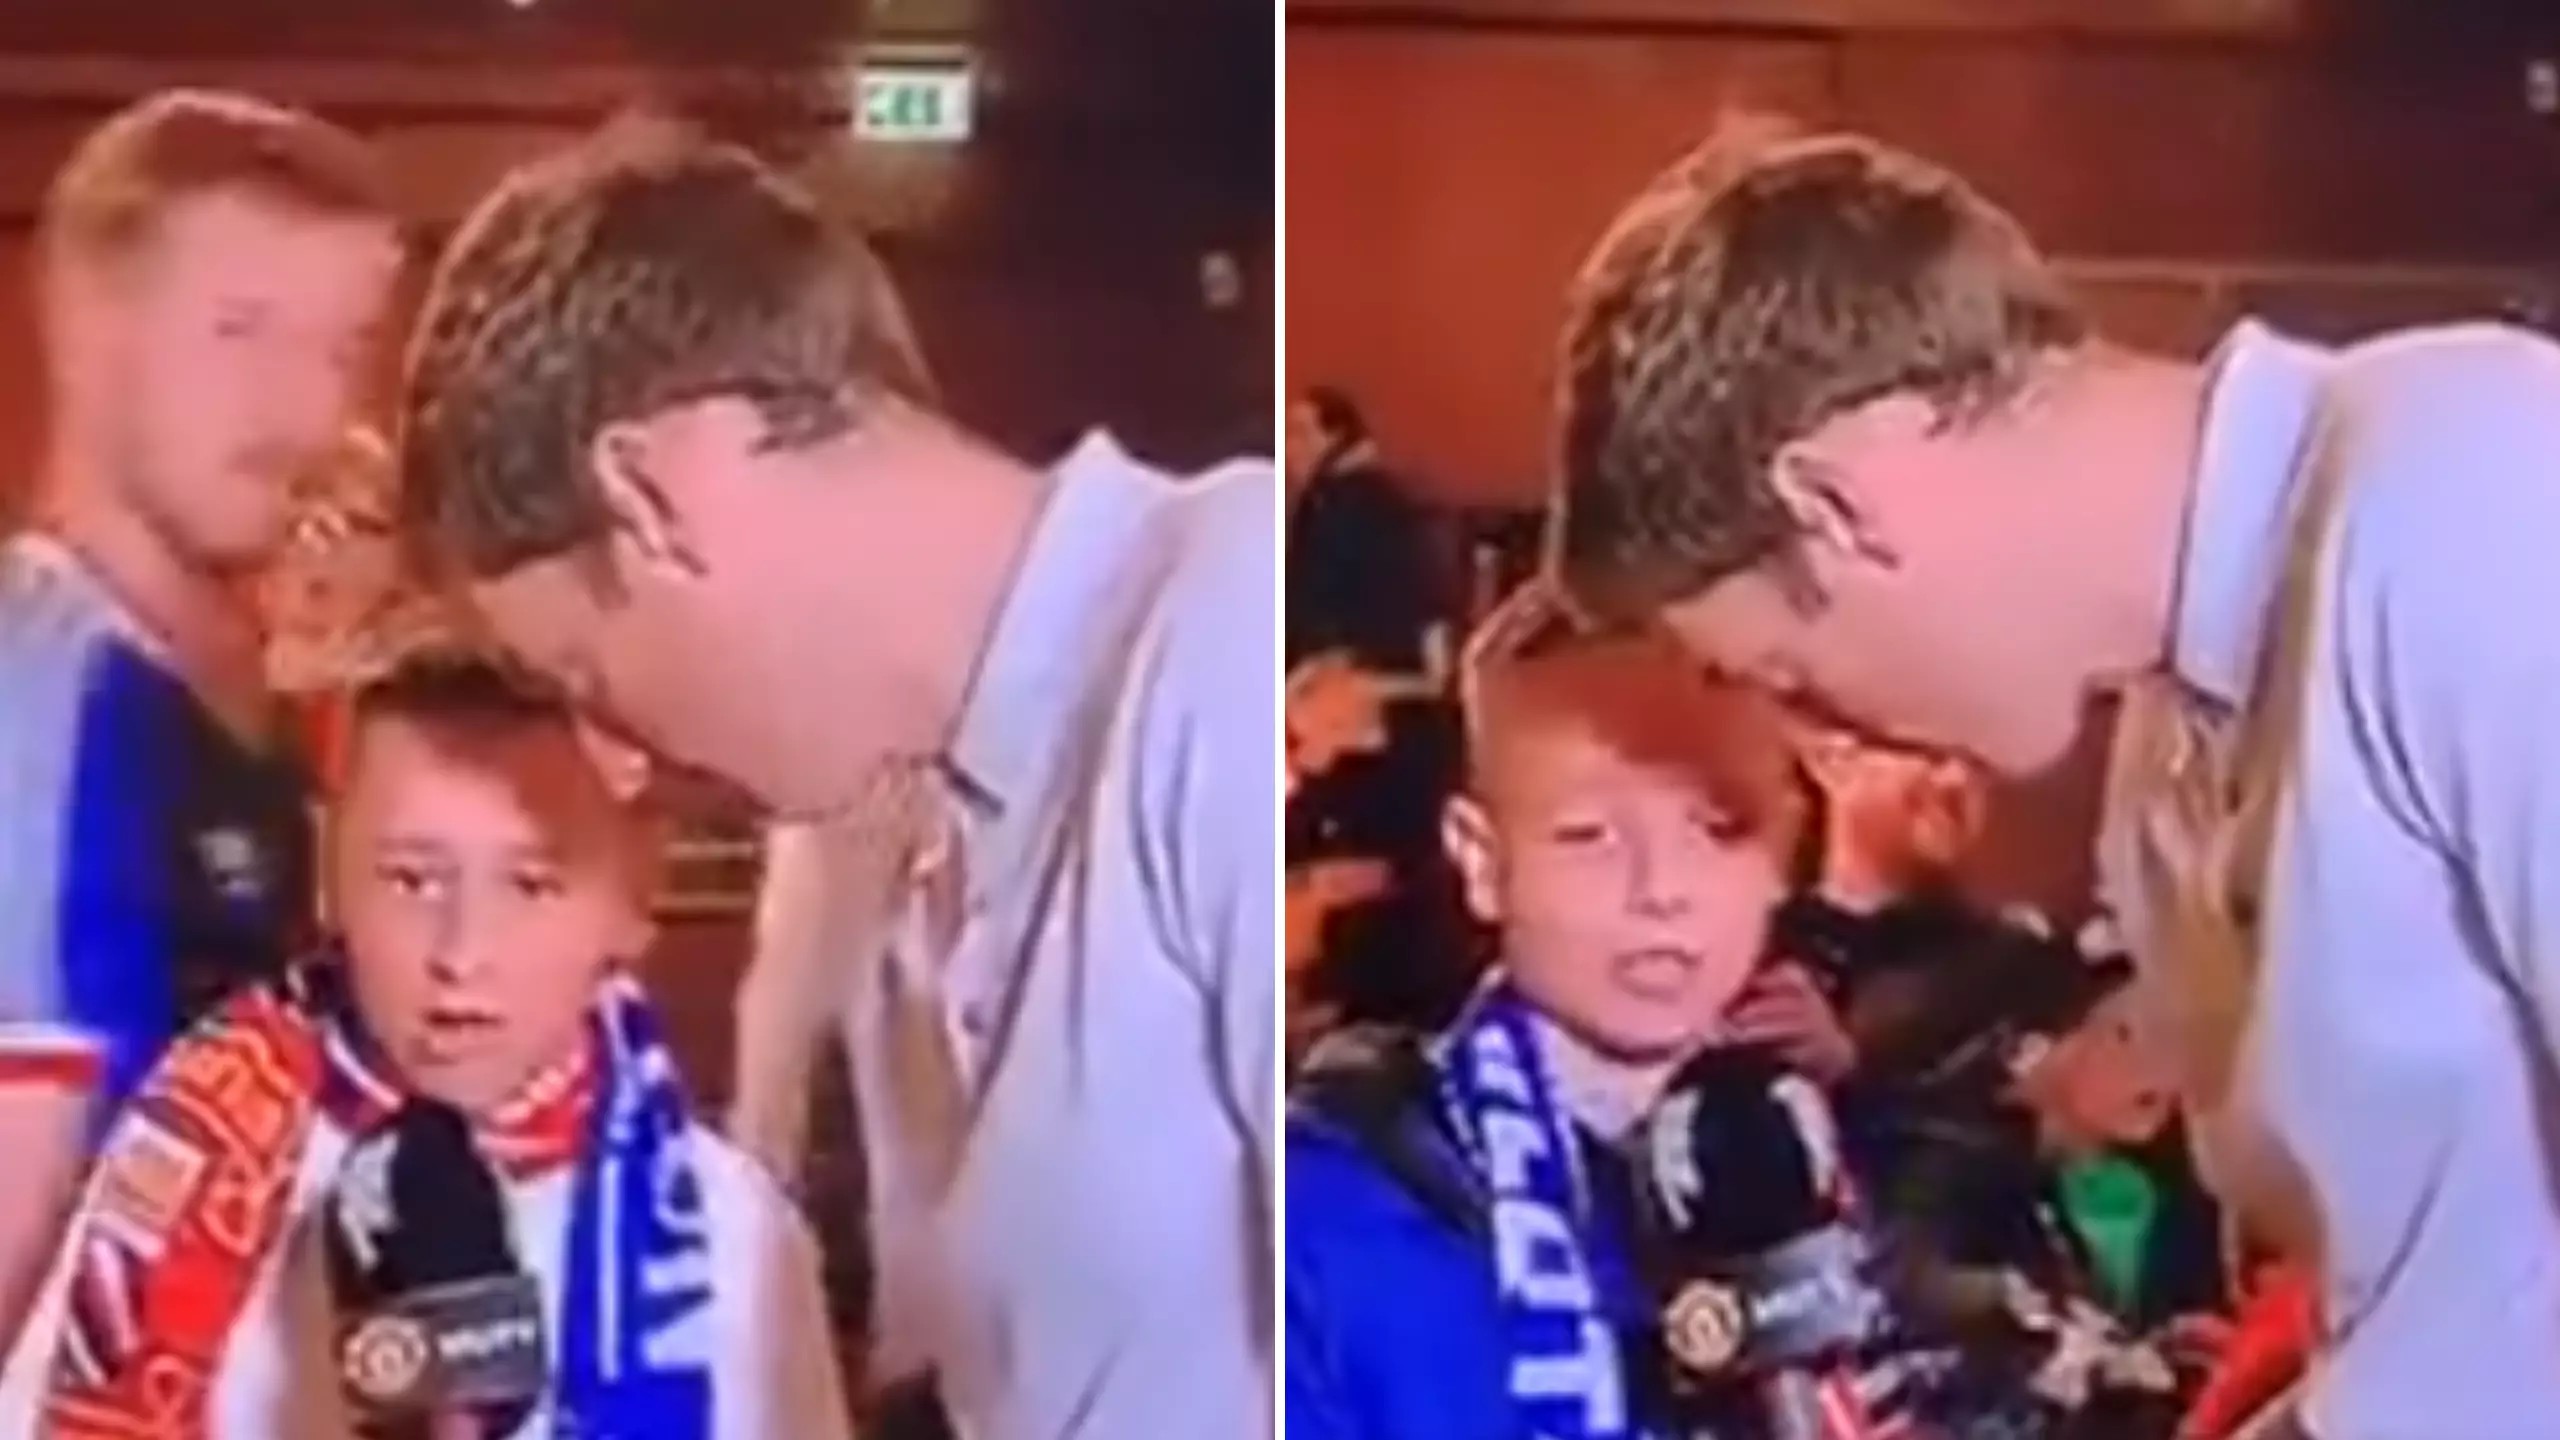 Children Hijack MUTV Show To Say 'Ole Out' Live On Air, Call A Player 'C**p'